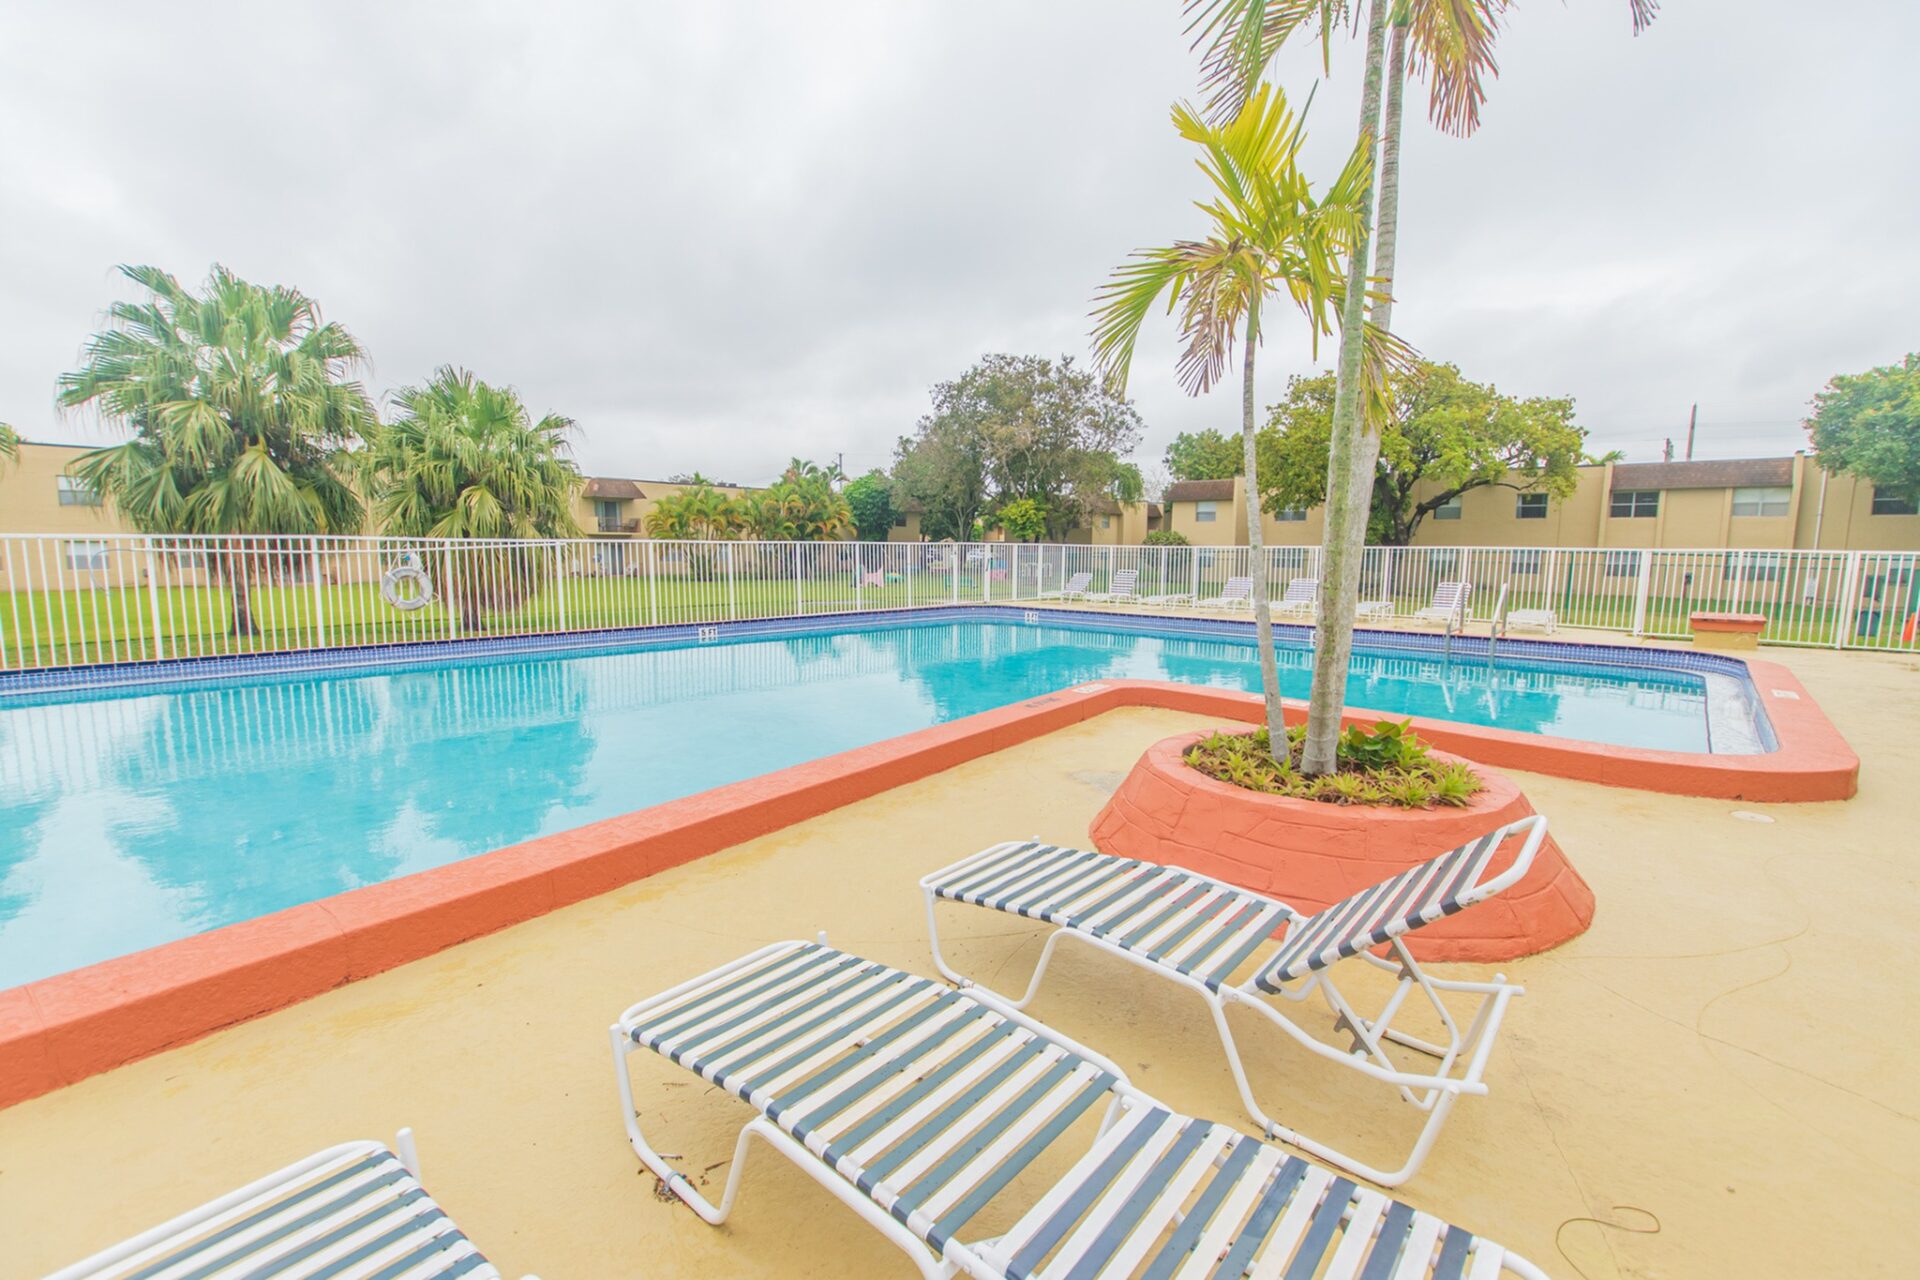 Fenced-in outdoor pool with a variety of seating options at Green Briar West apartments.